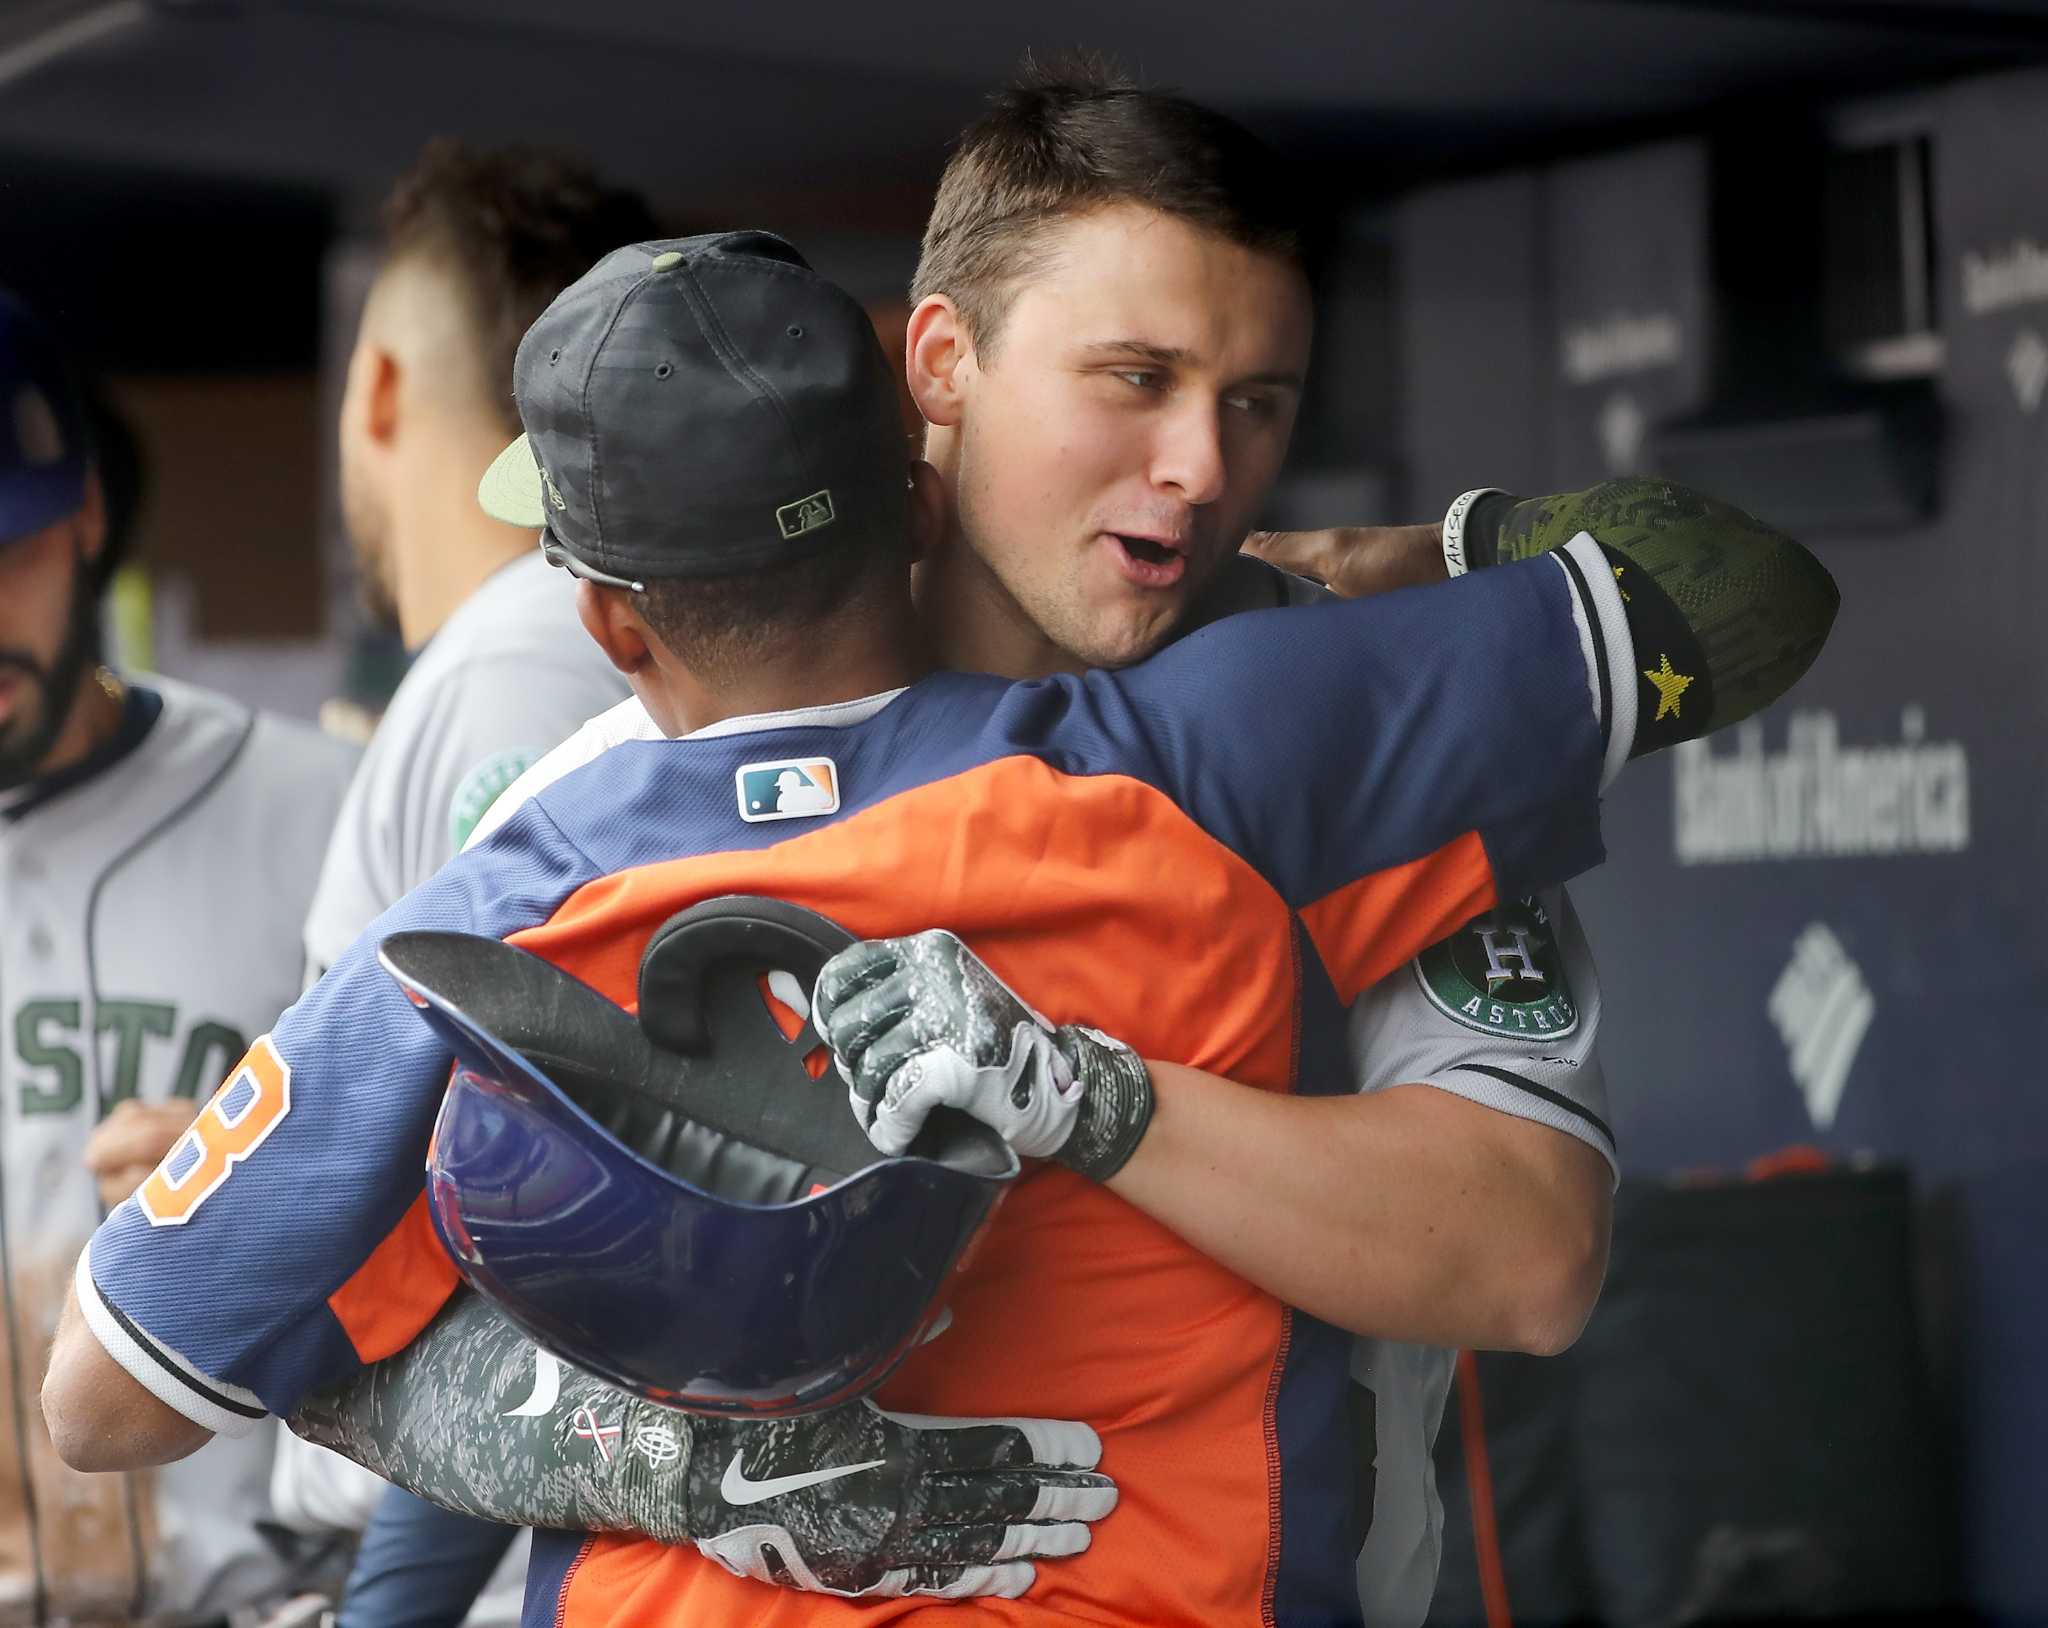 'Hugs for homers' becoming an Astros' dugout tradition - Houston Chronicle2048 x 1628